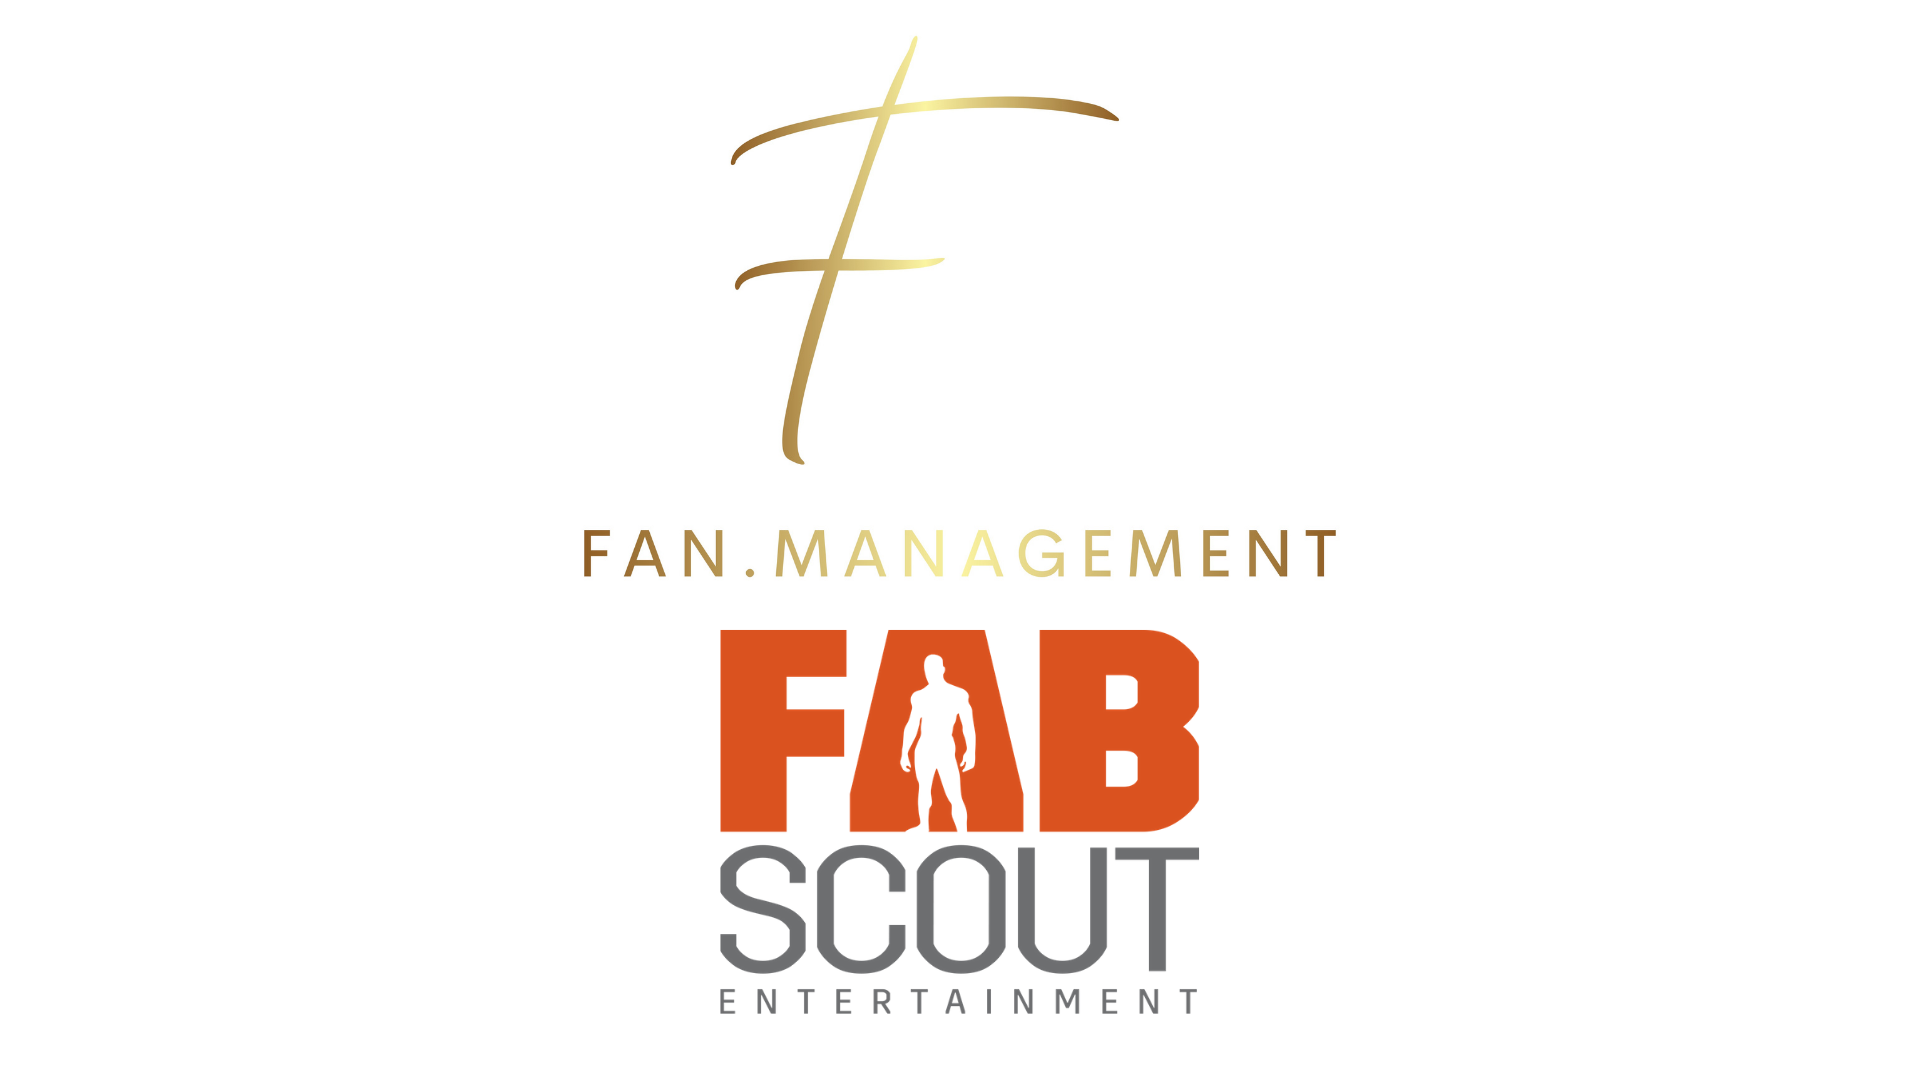 Fabscout and Fan.Management Partnership